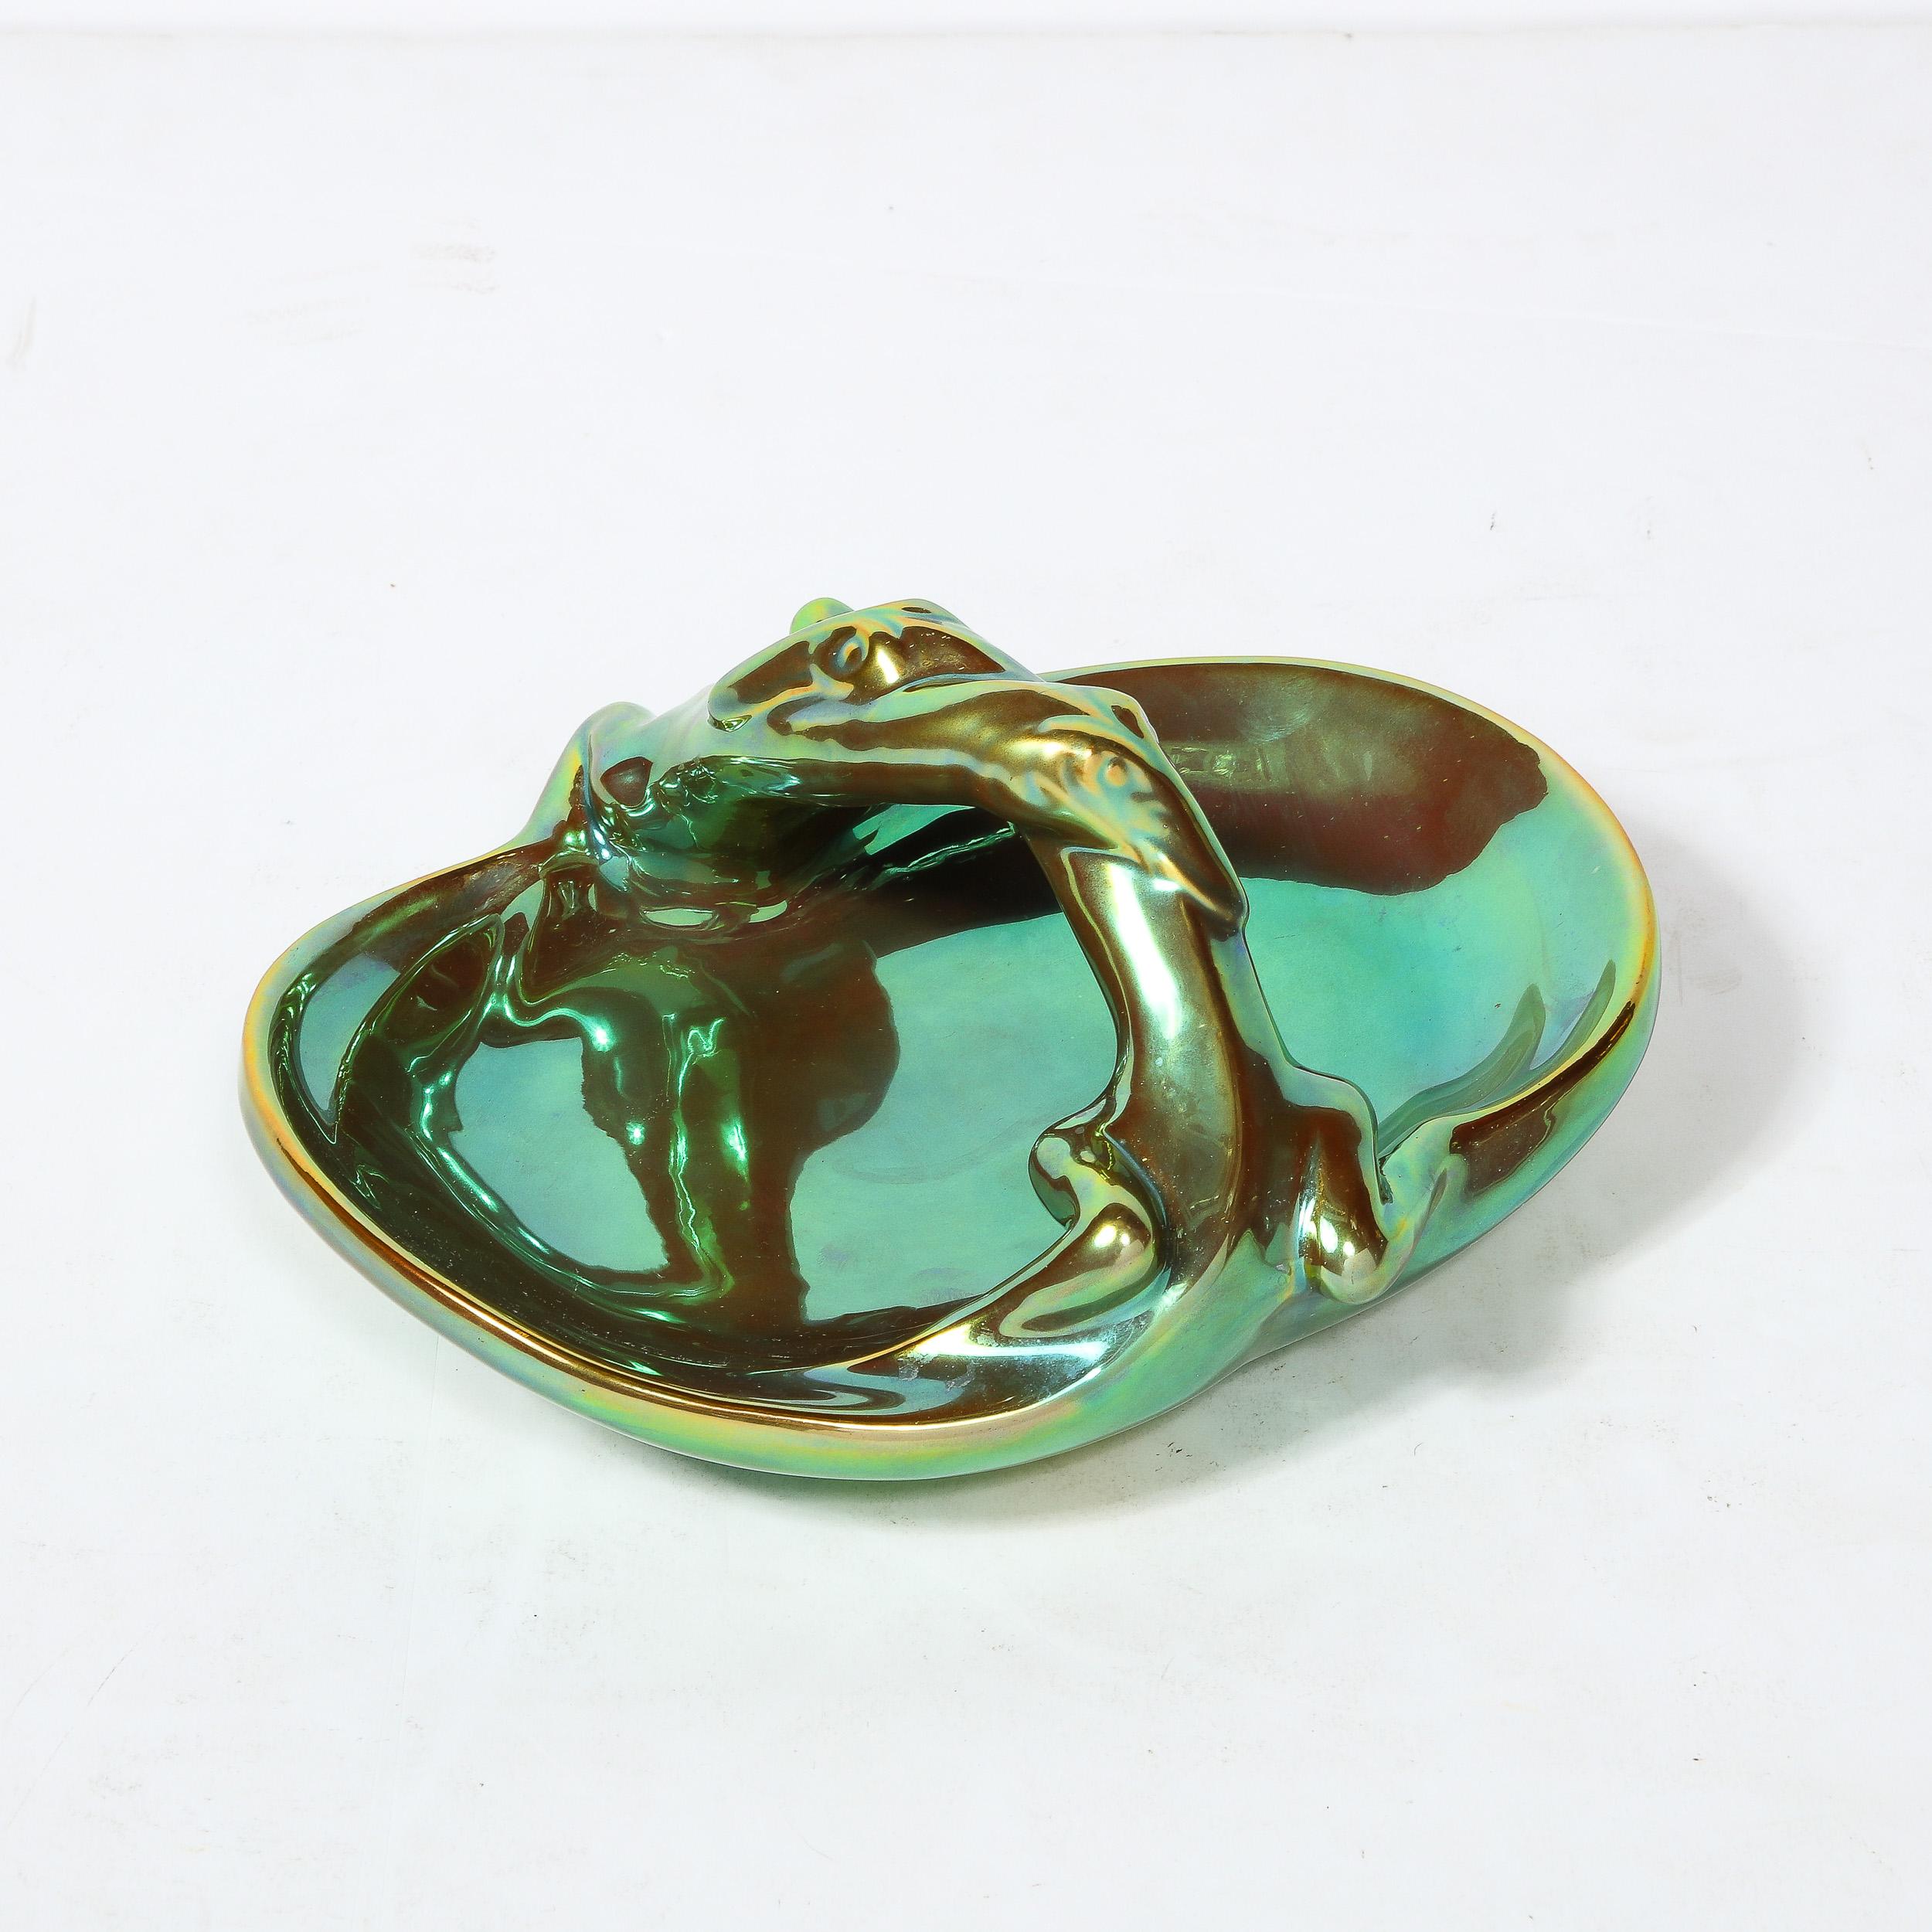 Art Deco Basket Form Ceramic Dish of Entwined Lizards by Zsolnay Eosin For Sale 14